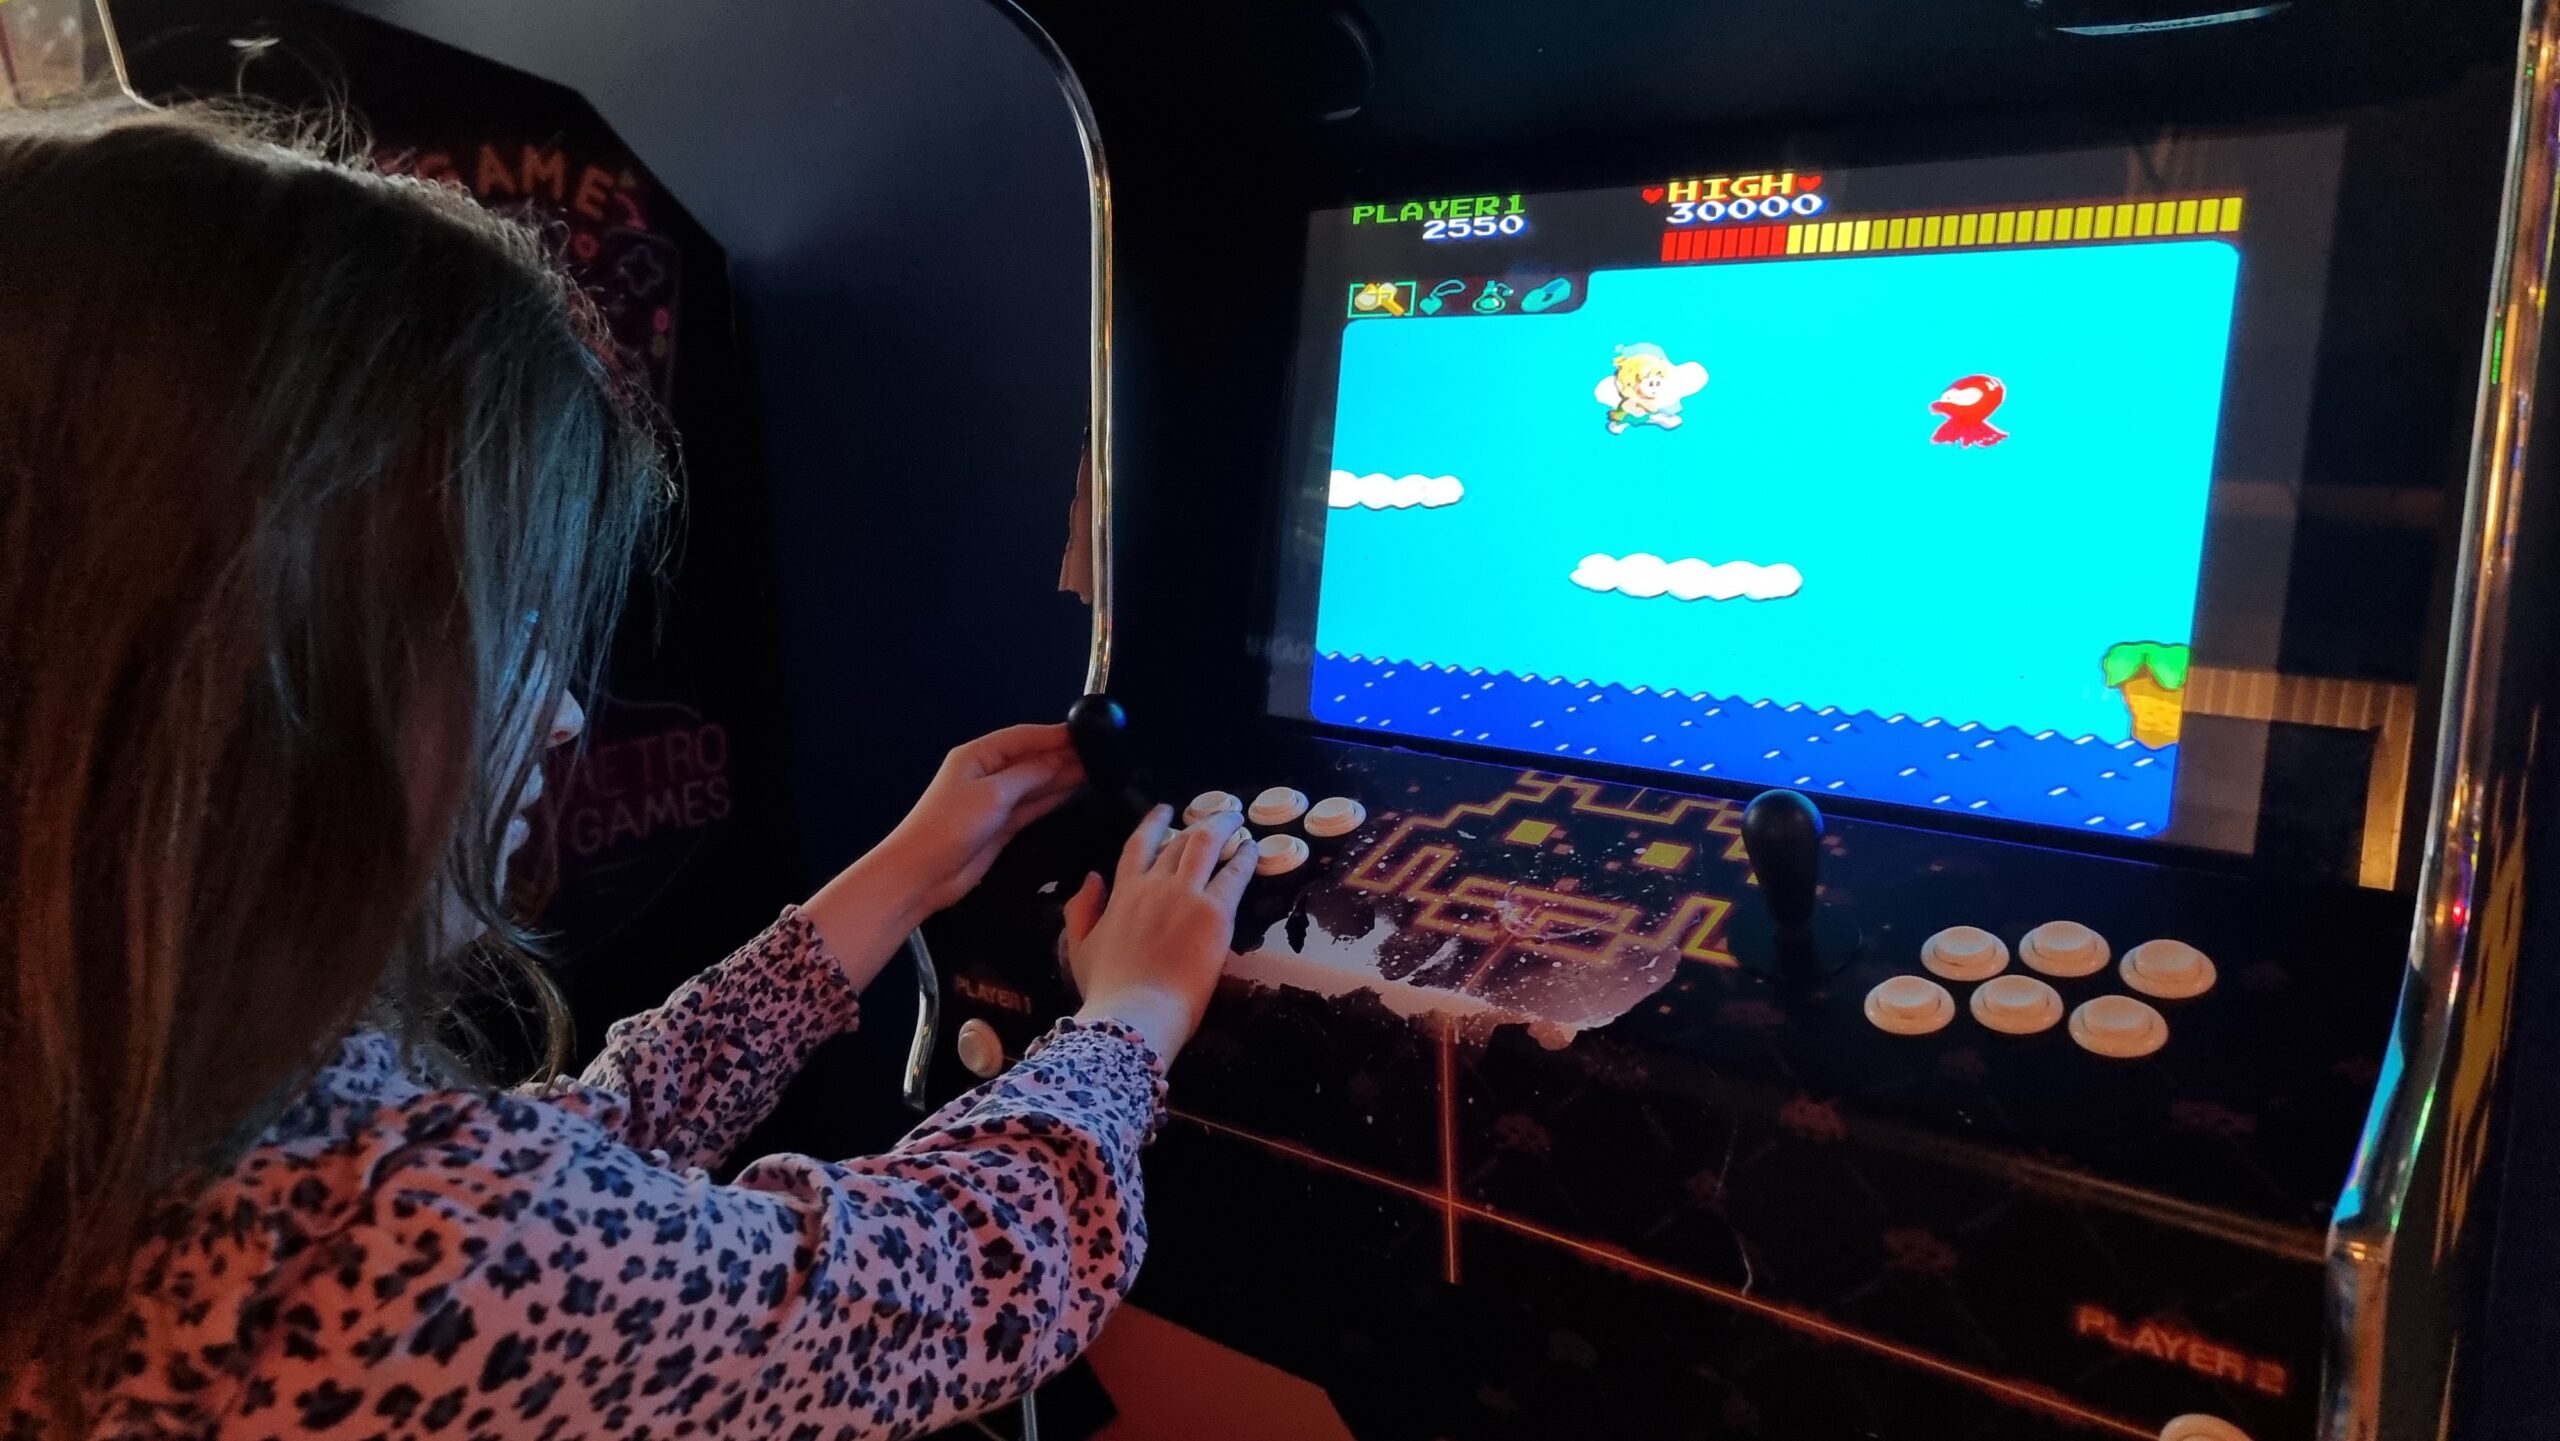 A young girl in a pink leopard-print top plays Wonder Boy on an arcade cabinet.